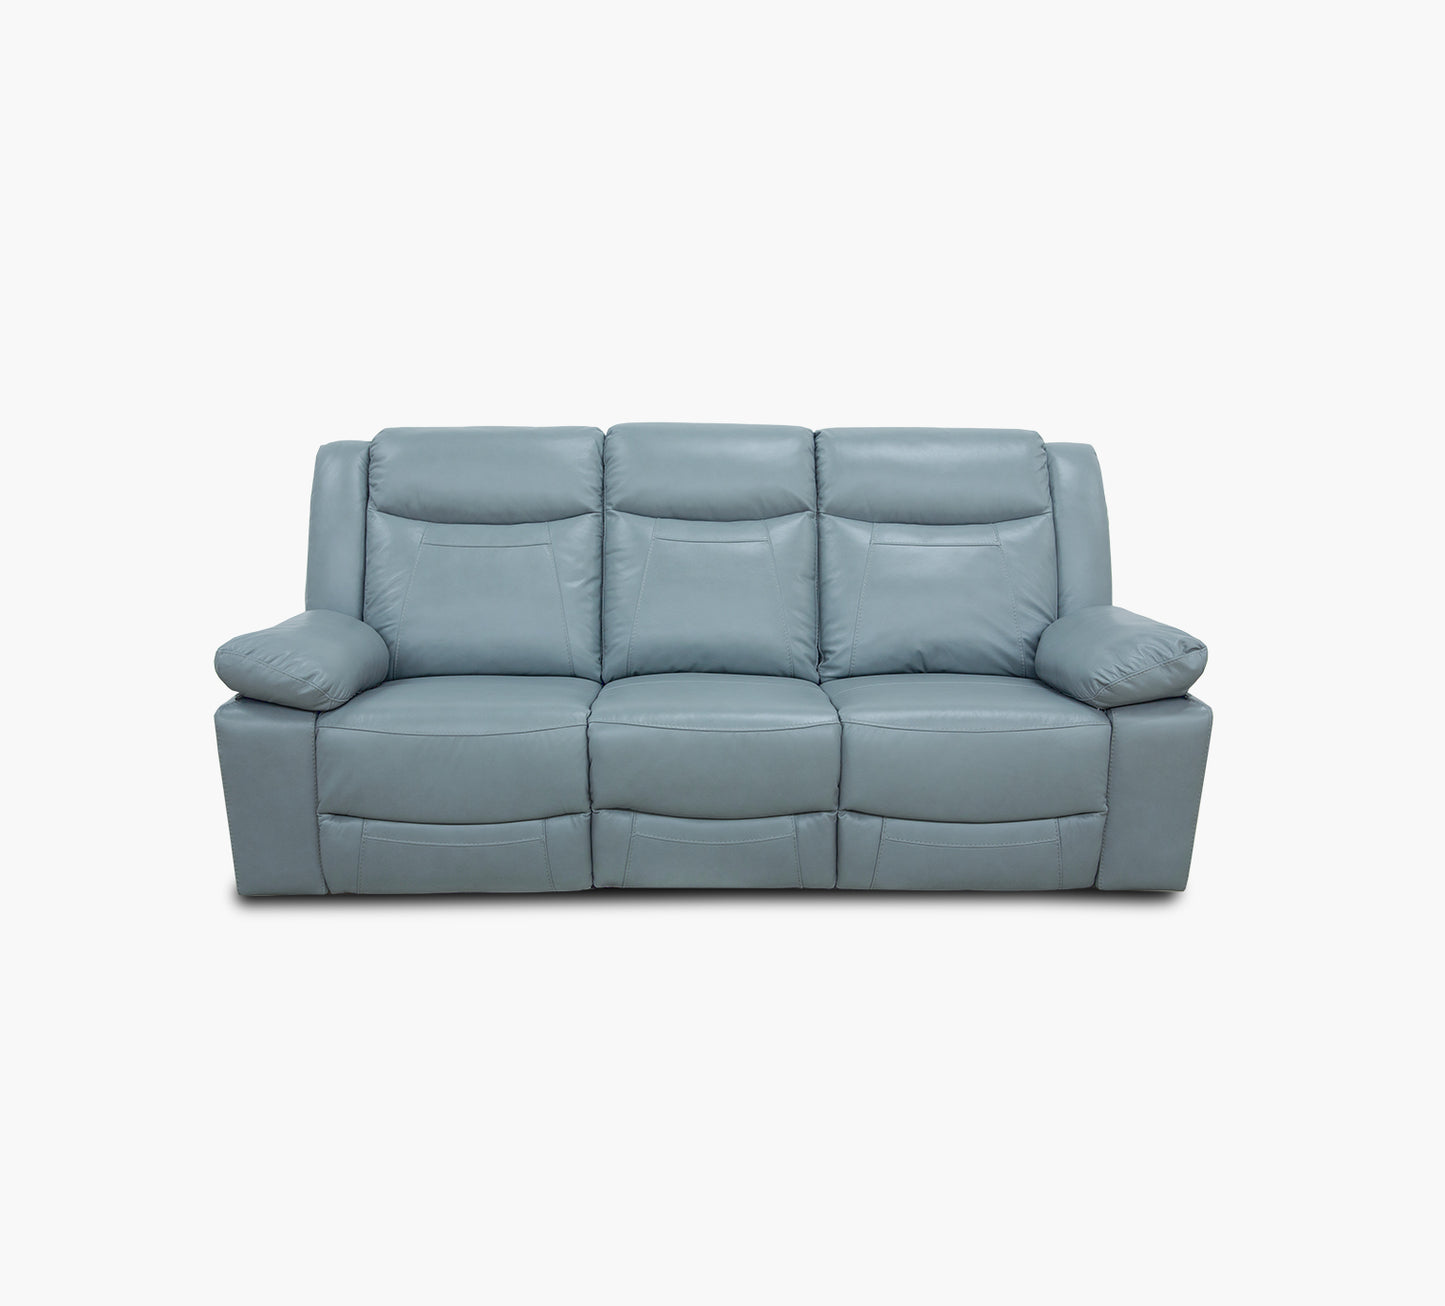 Dallas Teal Leather Reclining Sofa